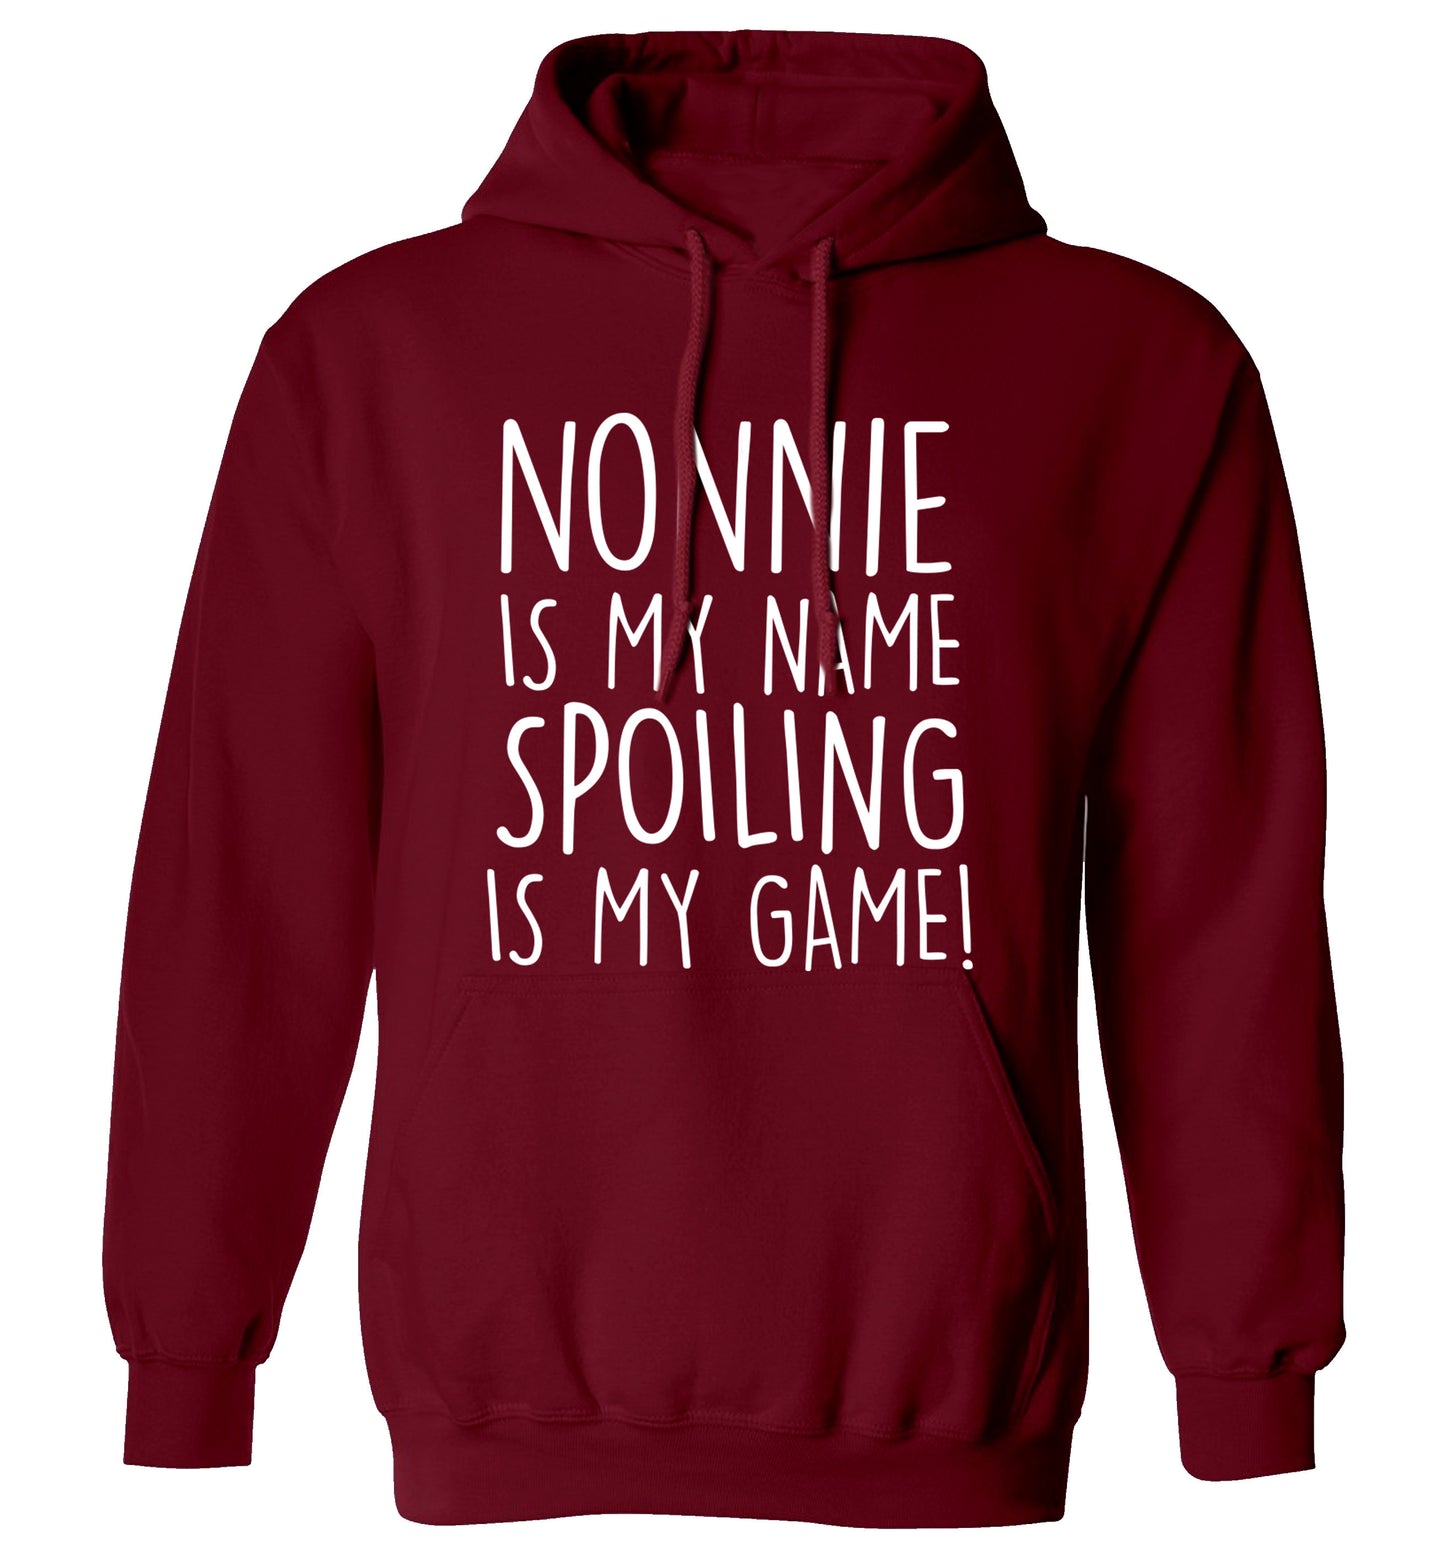 Nonnie is my name, spoiling is my game adults unisex maroon hoodie 2XL